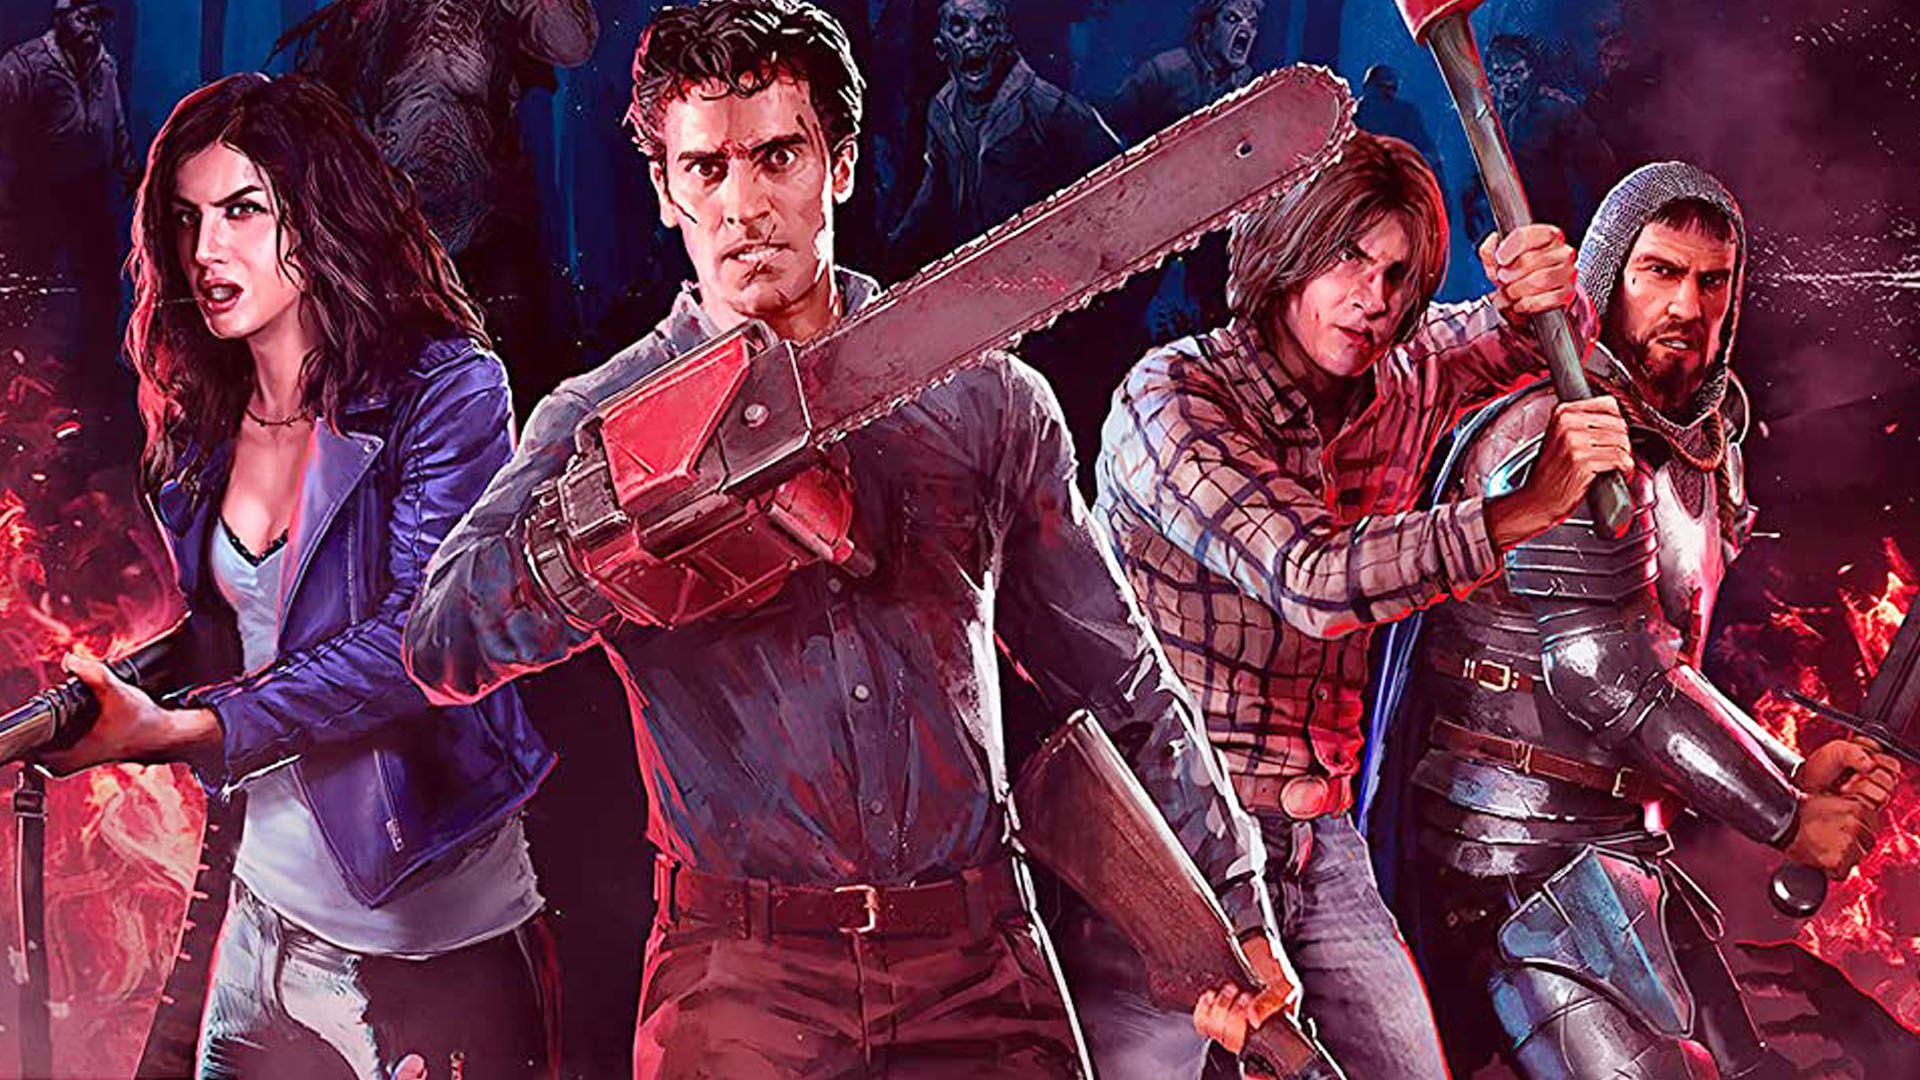 The State of Gaming May 2022: Evil Dead, Salt and Sacrifice, Trek to Yomi, Pac-Man Museum, Vampire: The Masquerade, Cotton Shooters, E3 2022, and NPD